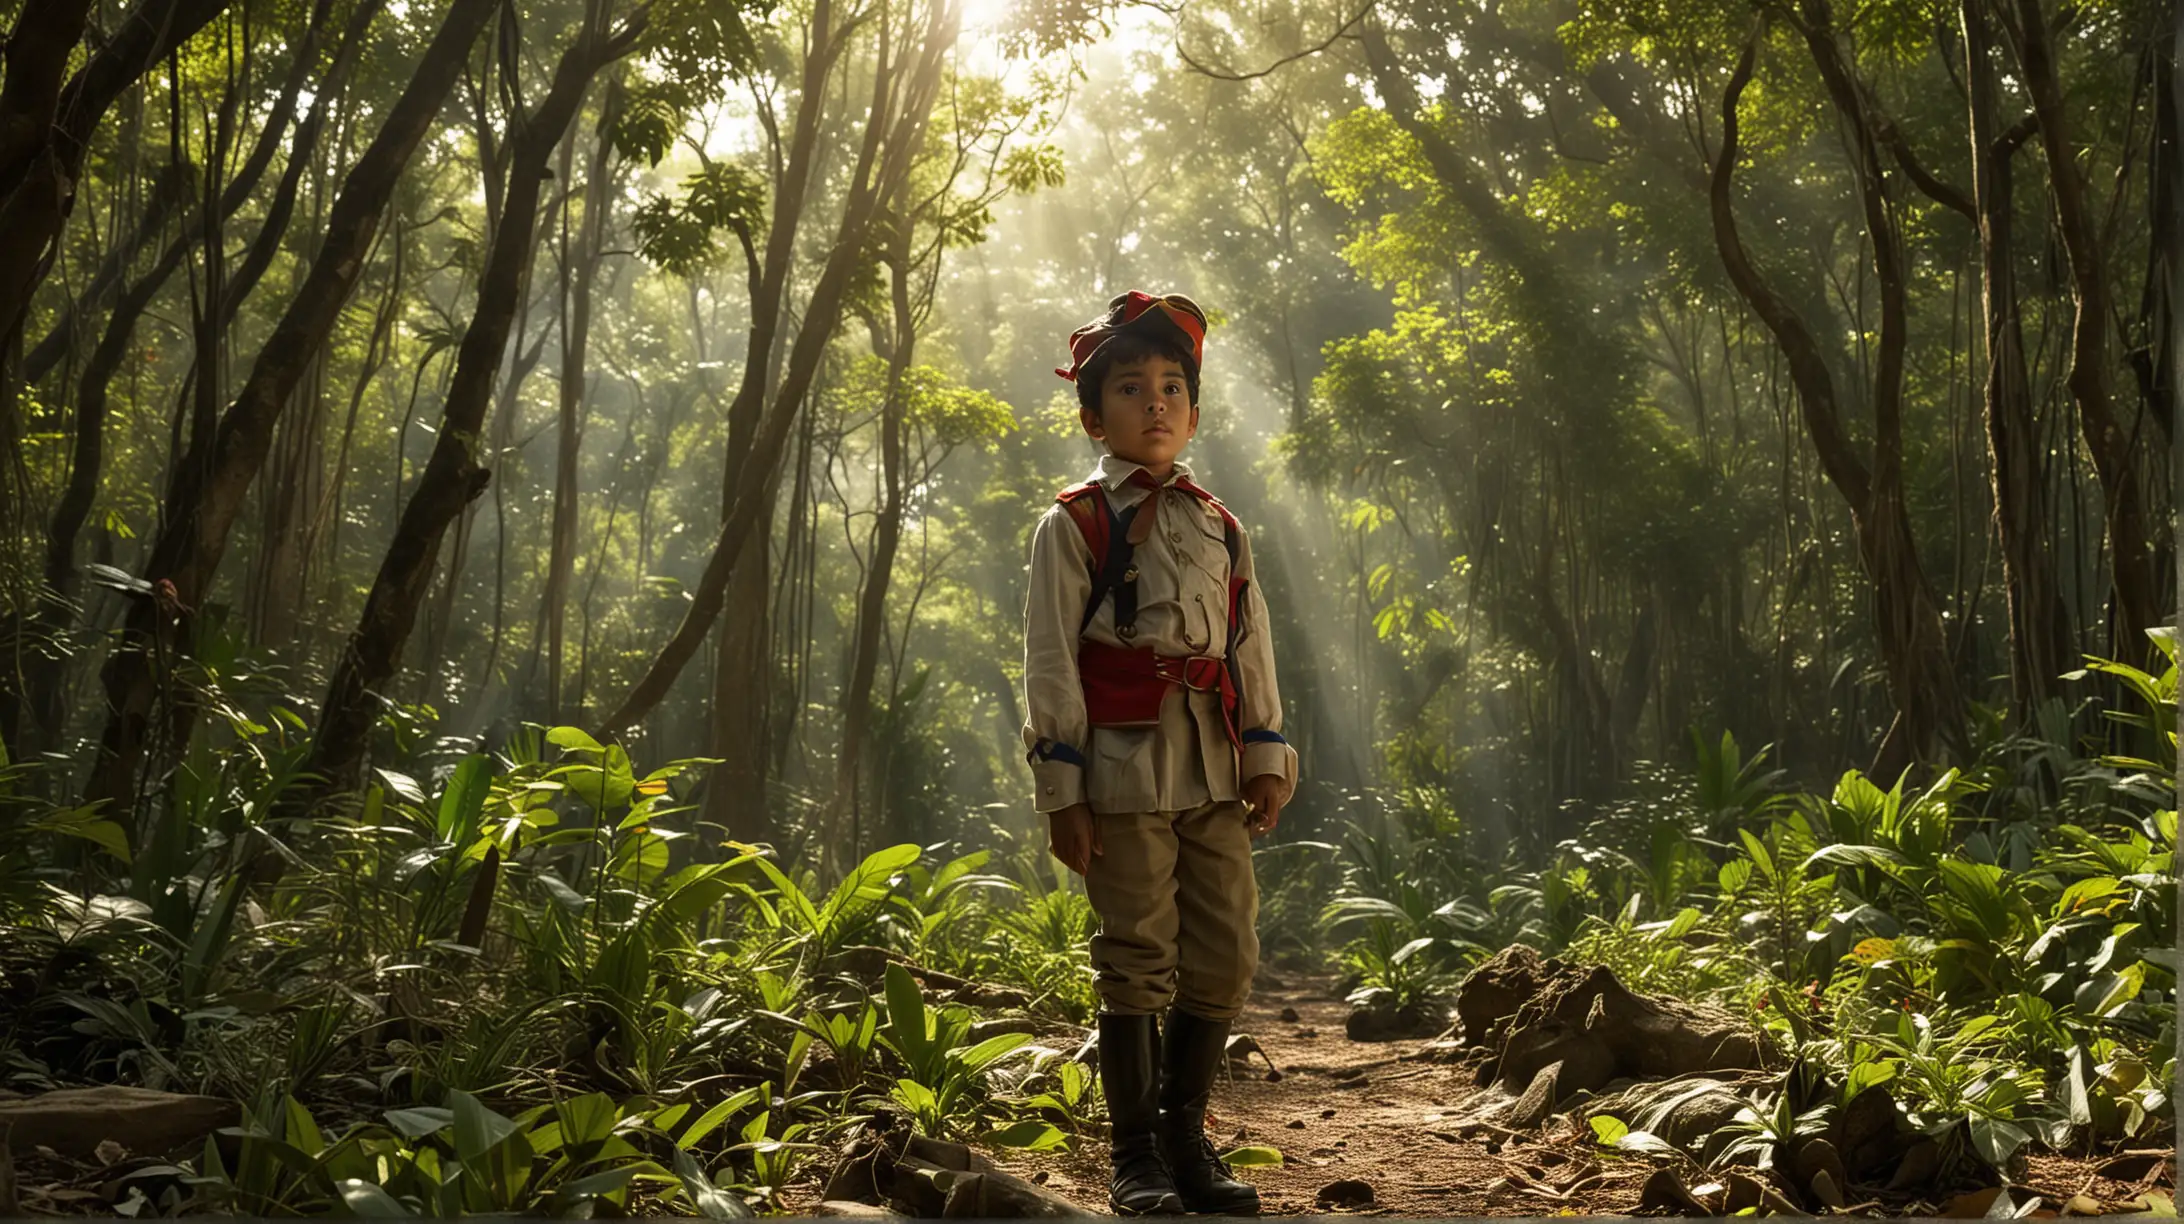 Visualize young Simón Bolívar exploring nature in his childhood:

Image Description: Create a picturesque scene of young Simón Bolívar, around 8 years old, wandering through a lush forest near his family's estate in Venezuela. The sunlight filters through the canopy, casting dappled shadows on the ground as Bolívar marvels at the diversity of flora and fauna around him.